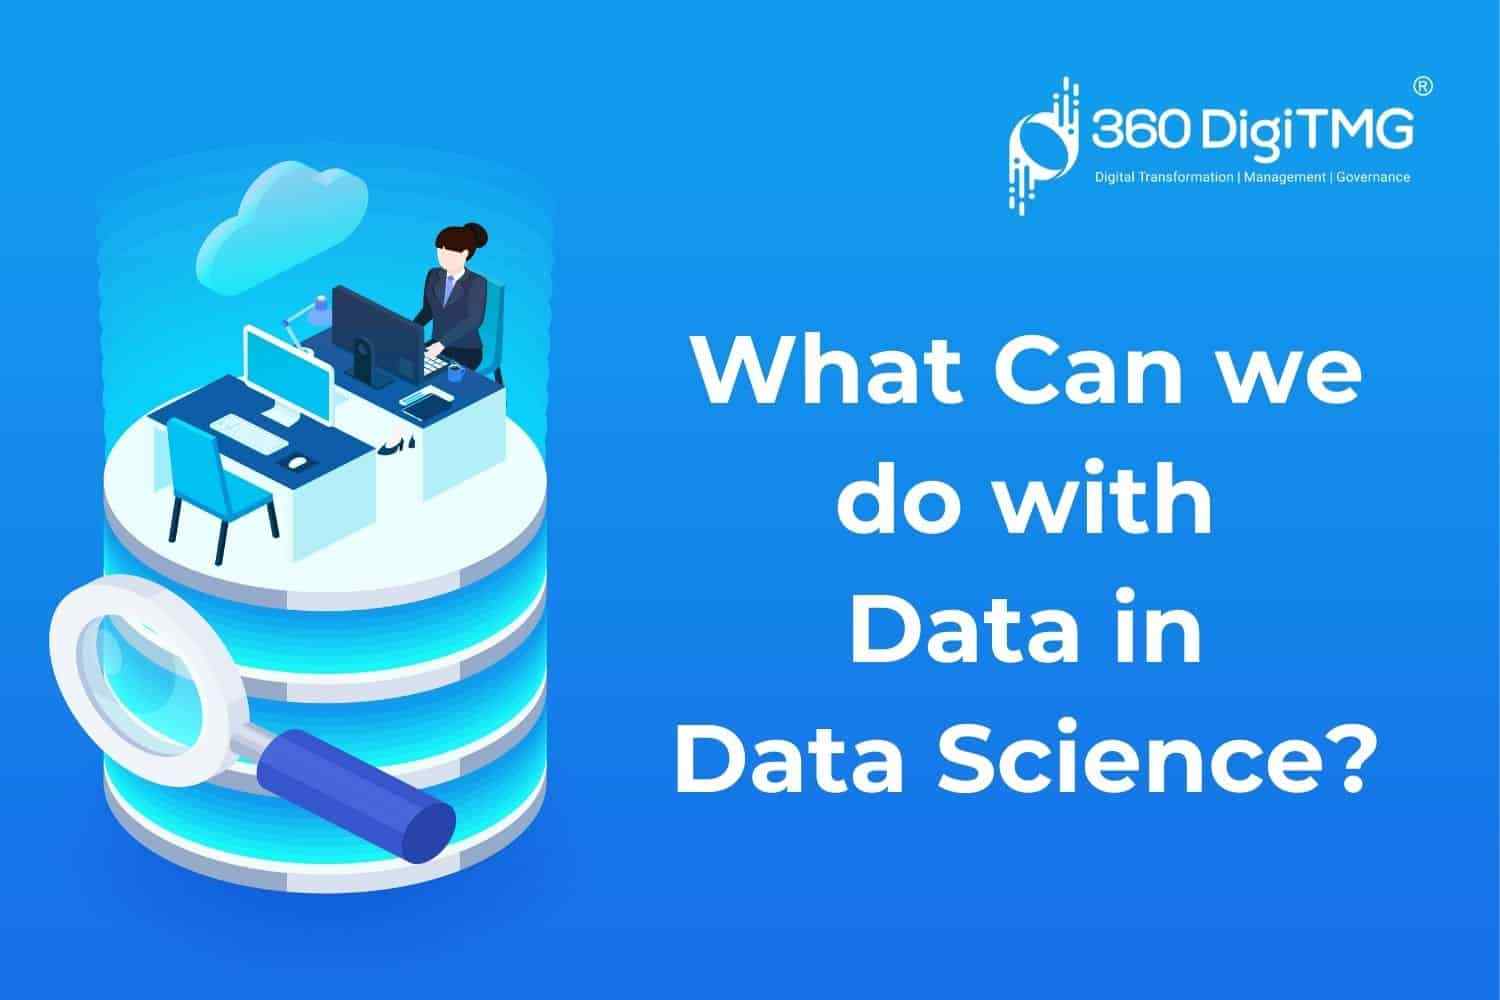 What Can We Do with Data in Data Science?